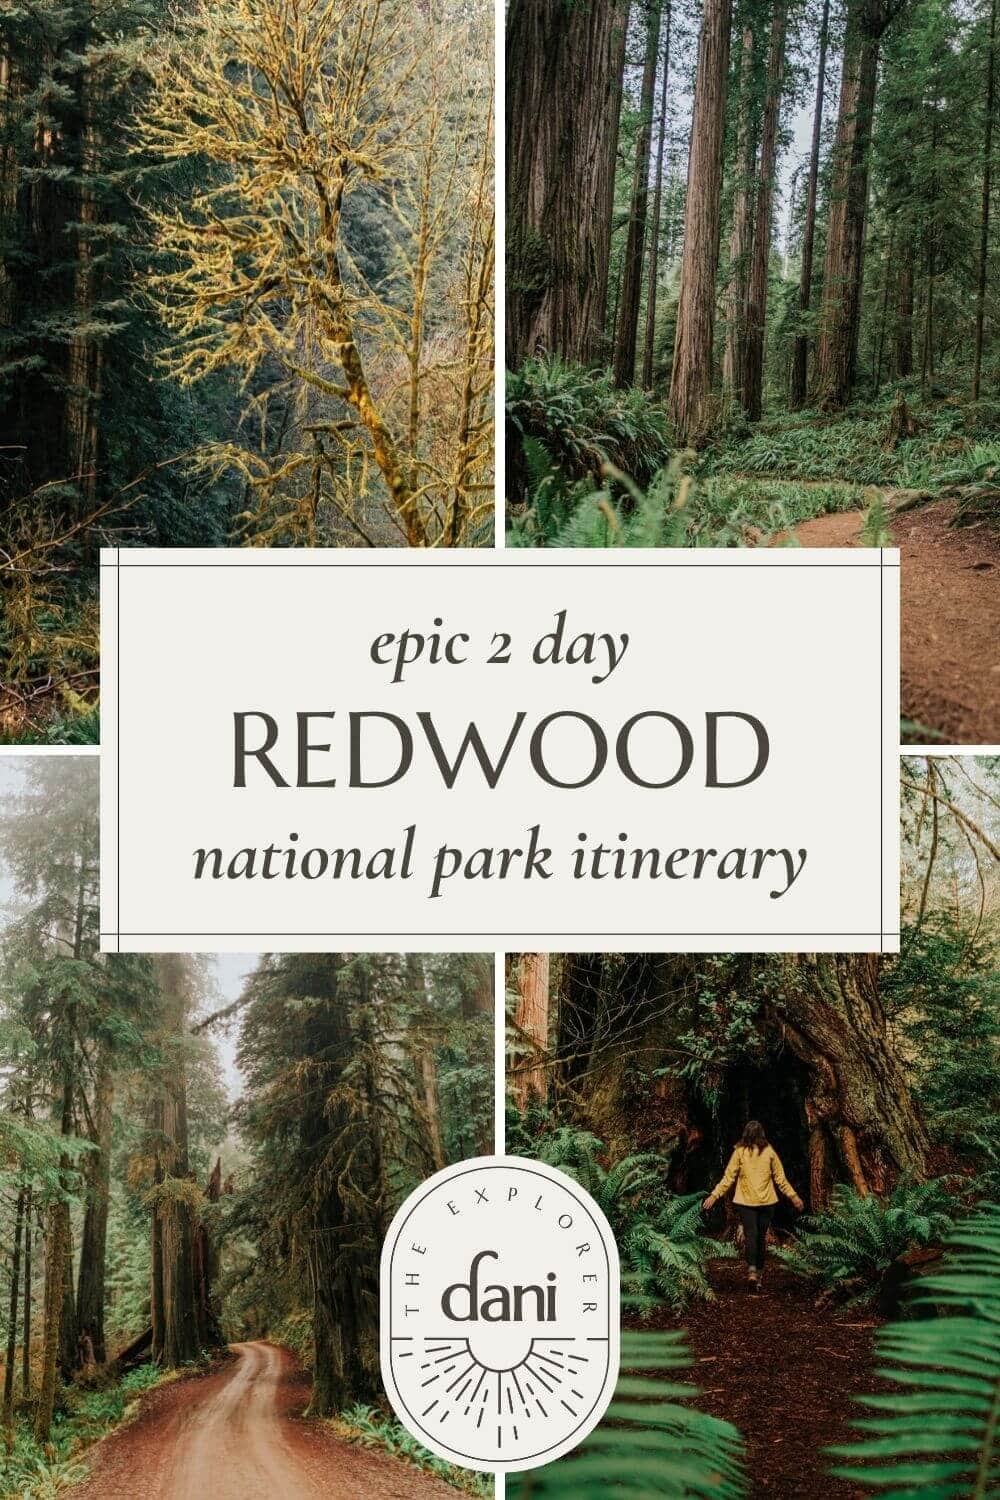 2 day redwood national park itinerary